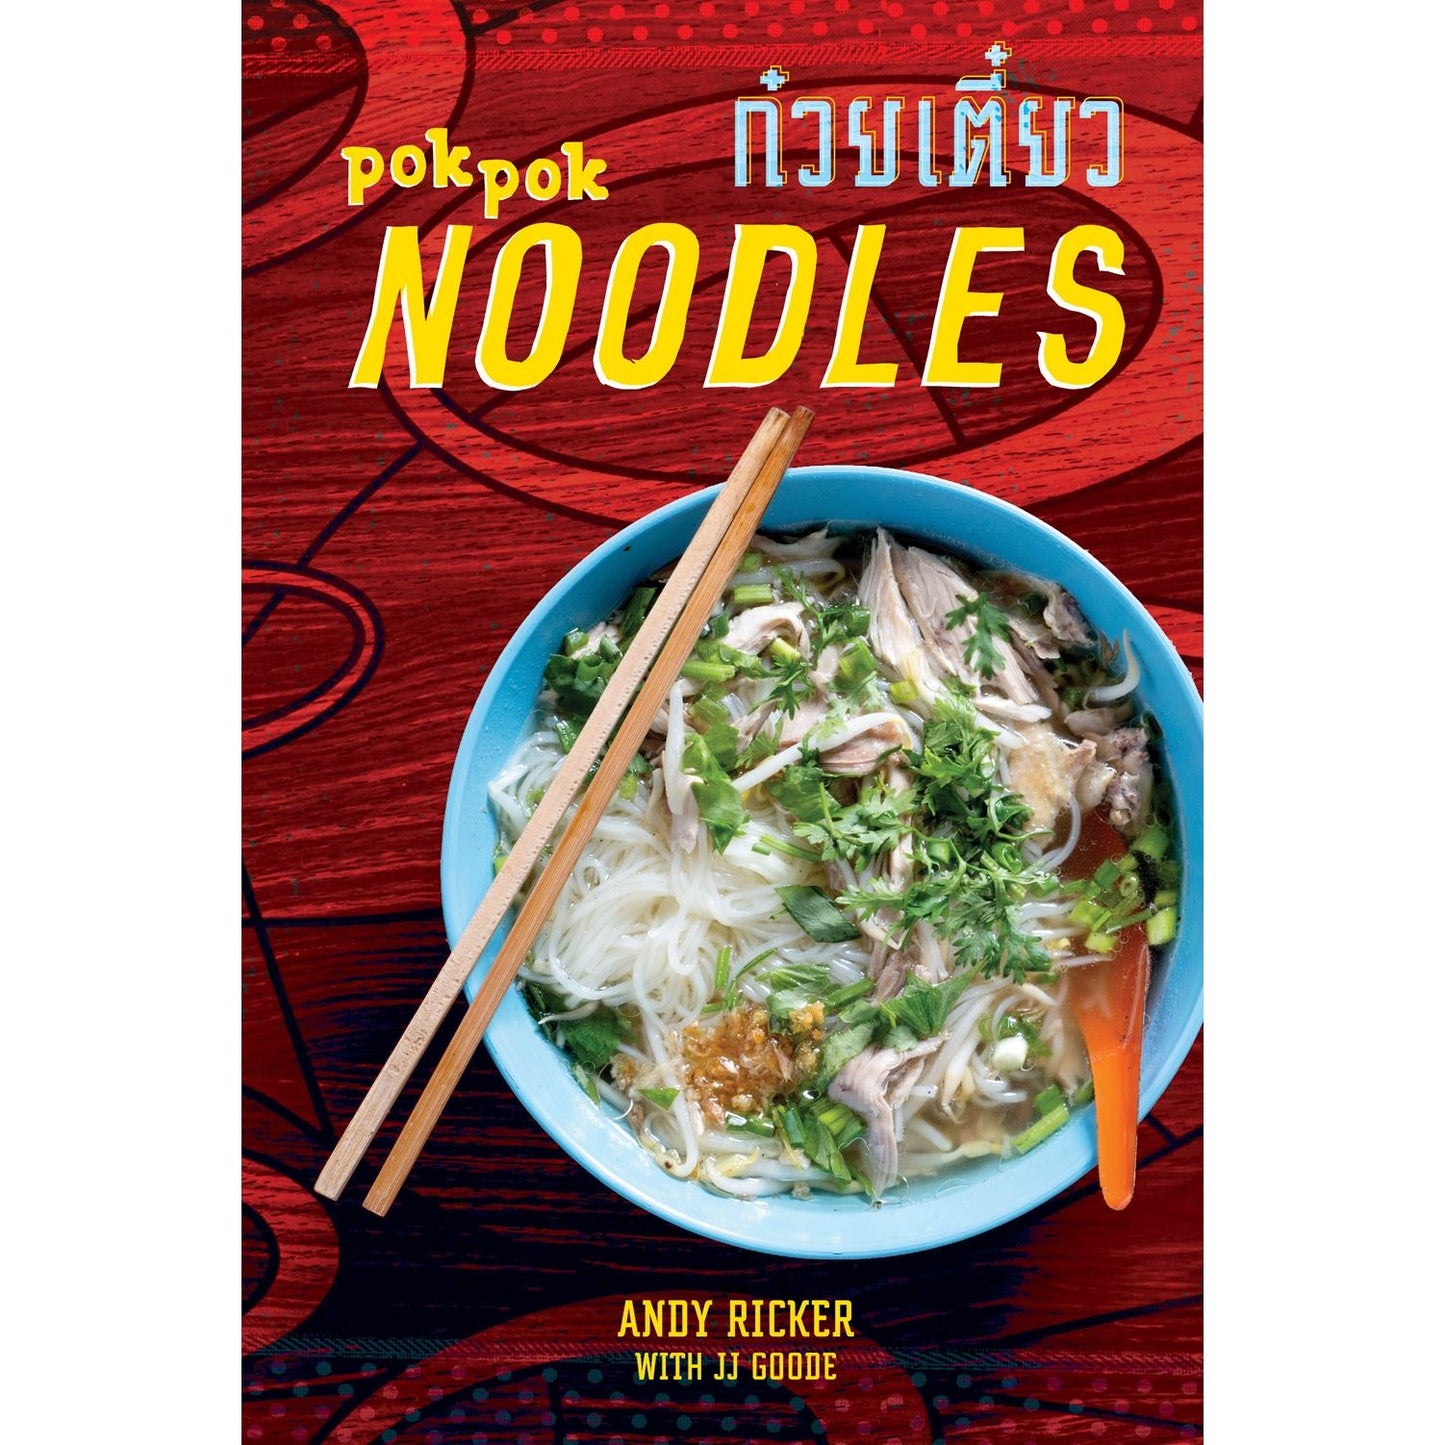 Pok Pok Noodles: Recipes from Thailand and Beyond (Andy Ricker)